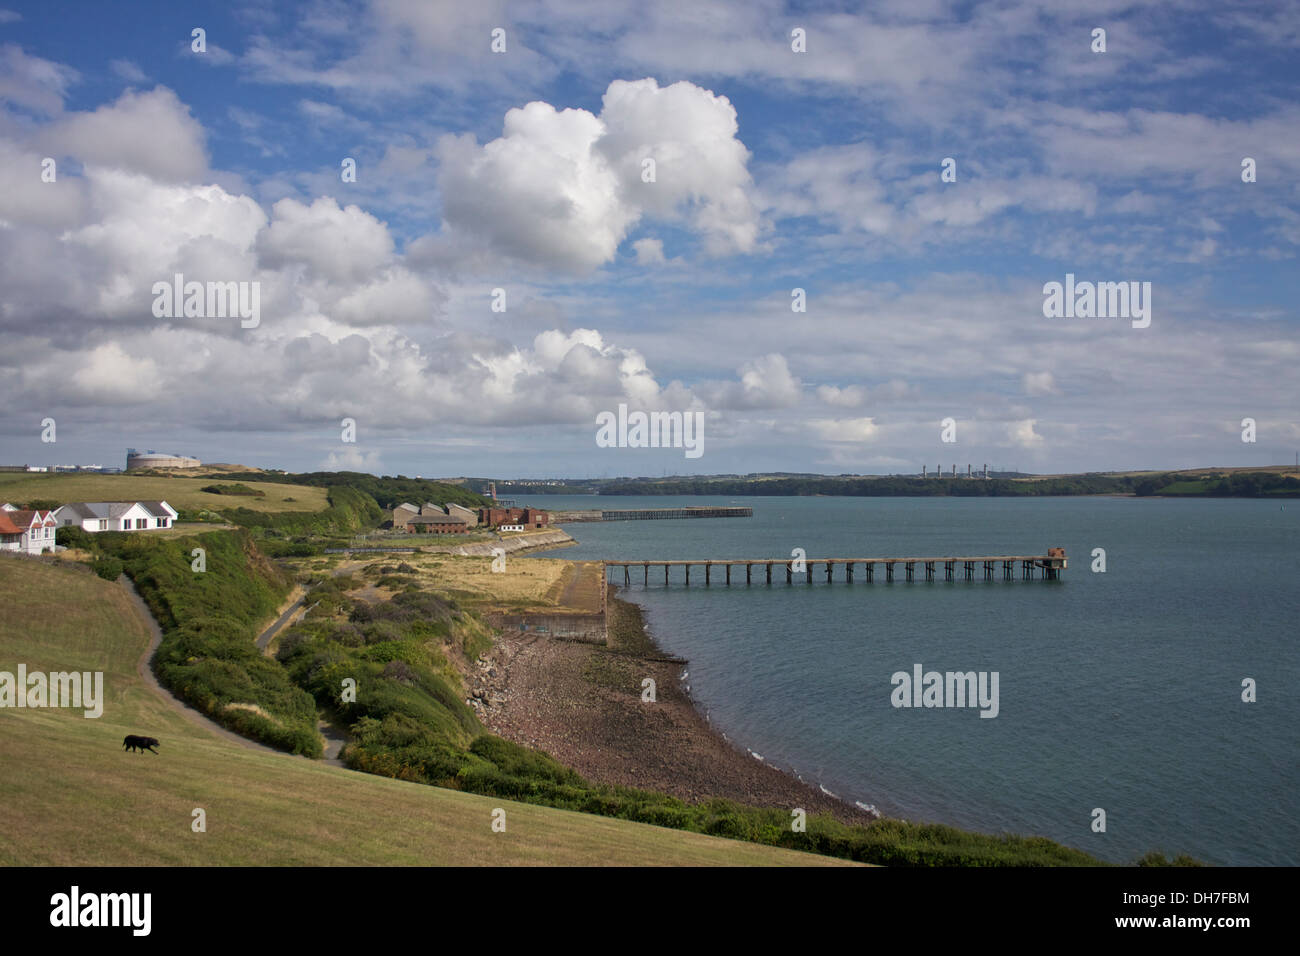 Milford Haven oil refinery, Pembrokeshire, Wales, UK Stock Photo